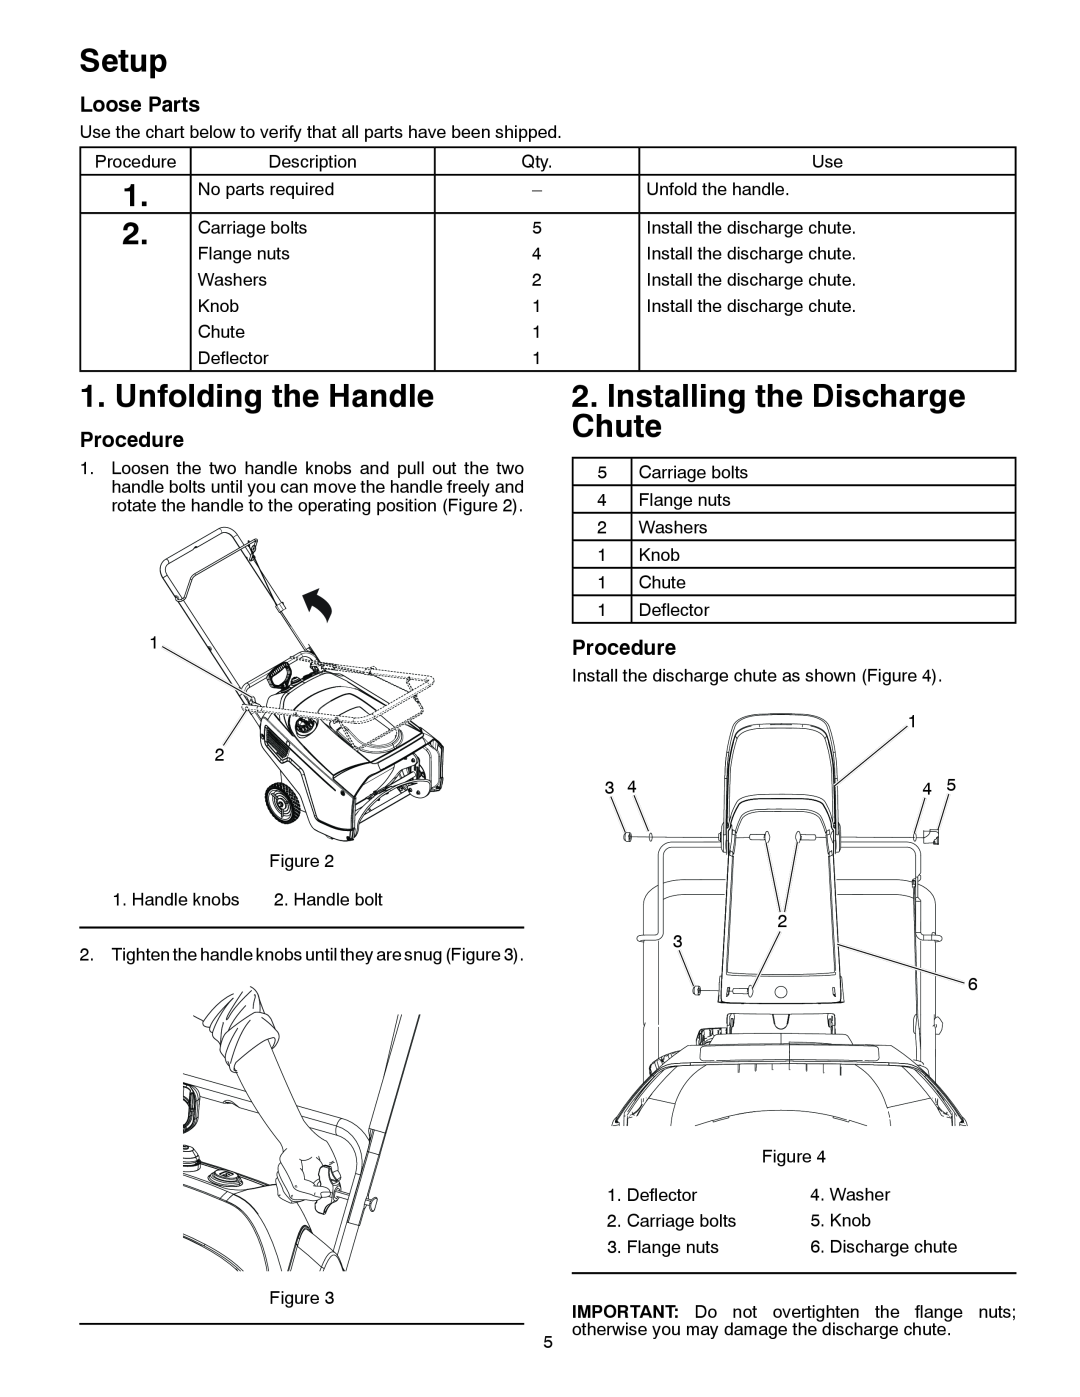 McCulloch 96182000500, MC621 Setup, Unfolding the Handle, Installing the Discharge Chute, Loose Parts, Procedure 